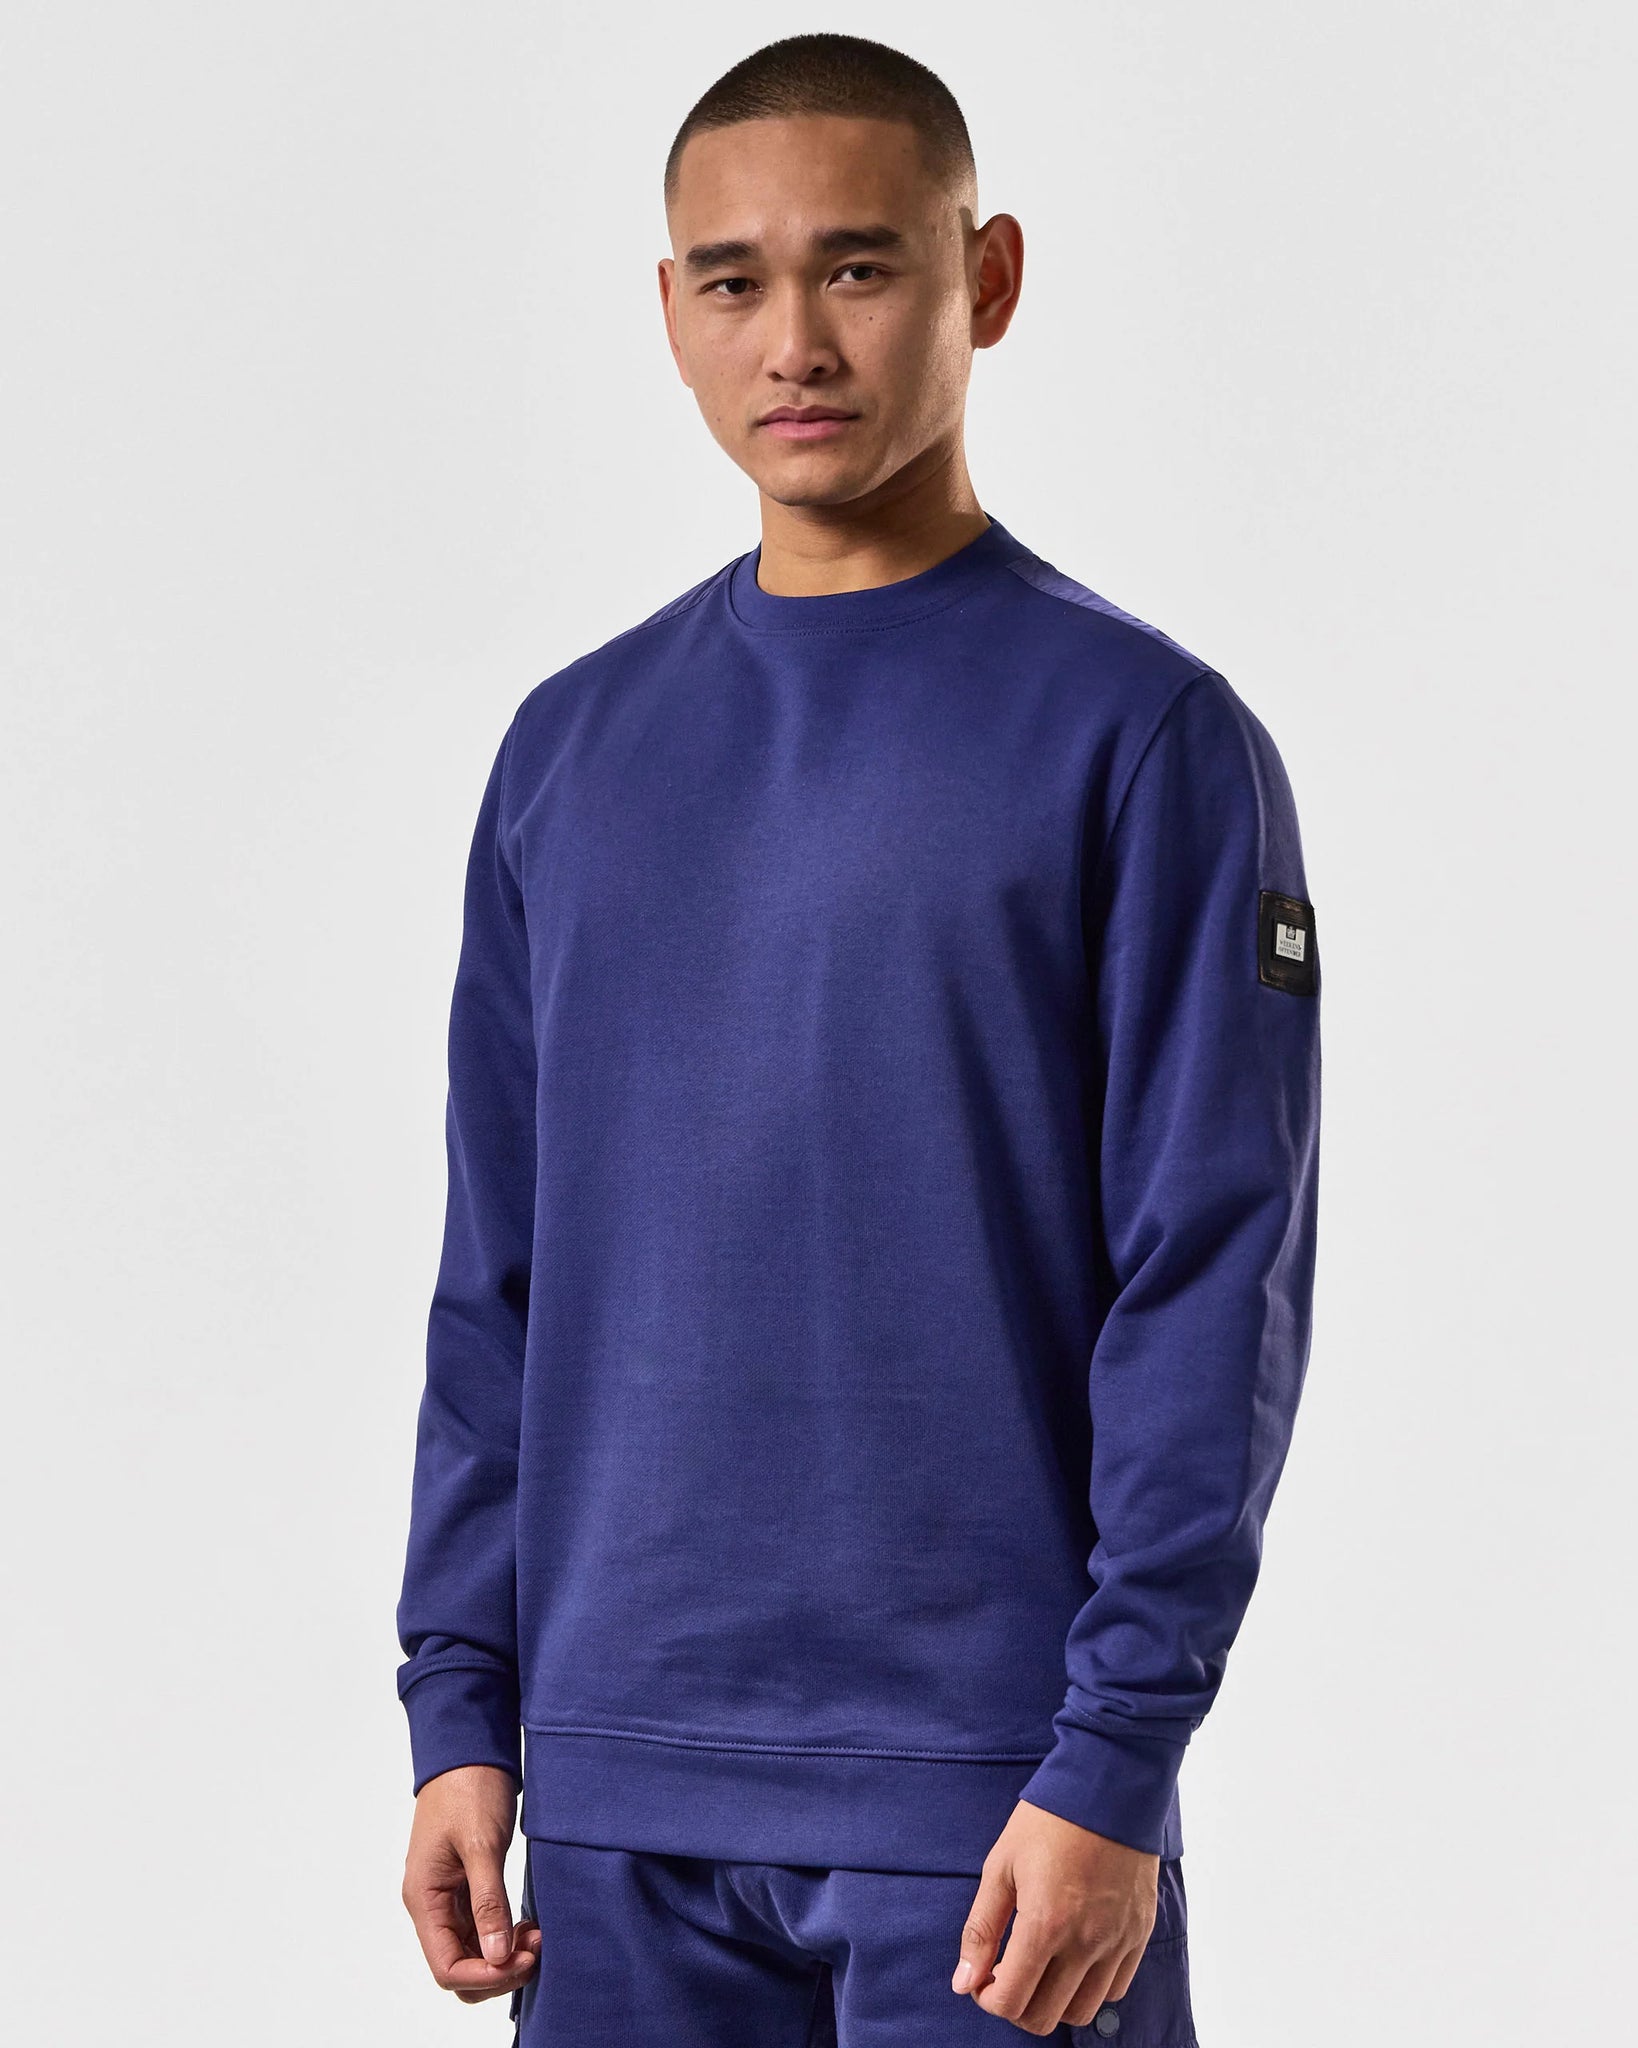 Weekend Offender F Bomb Sweat Bright Navy